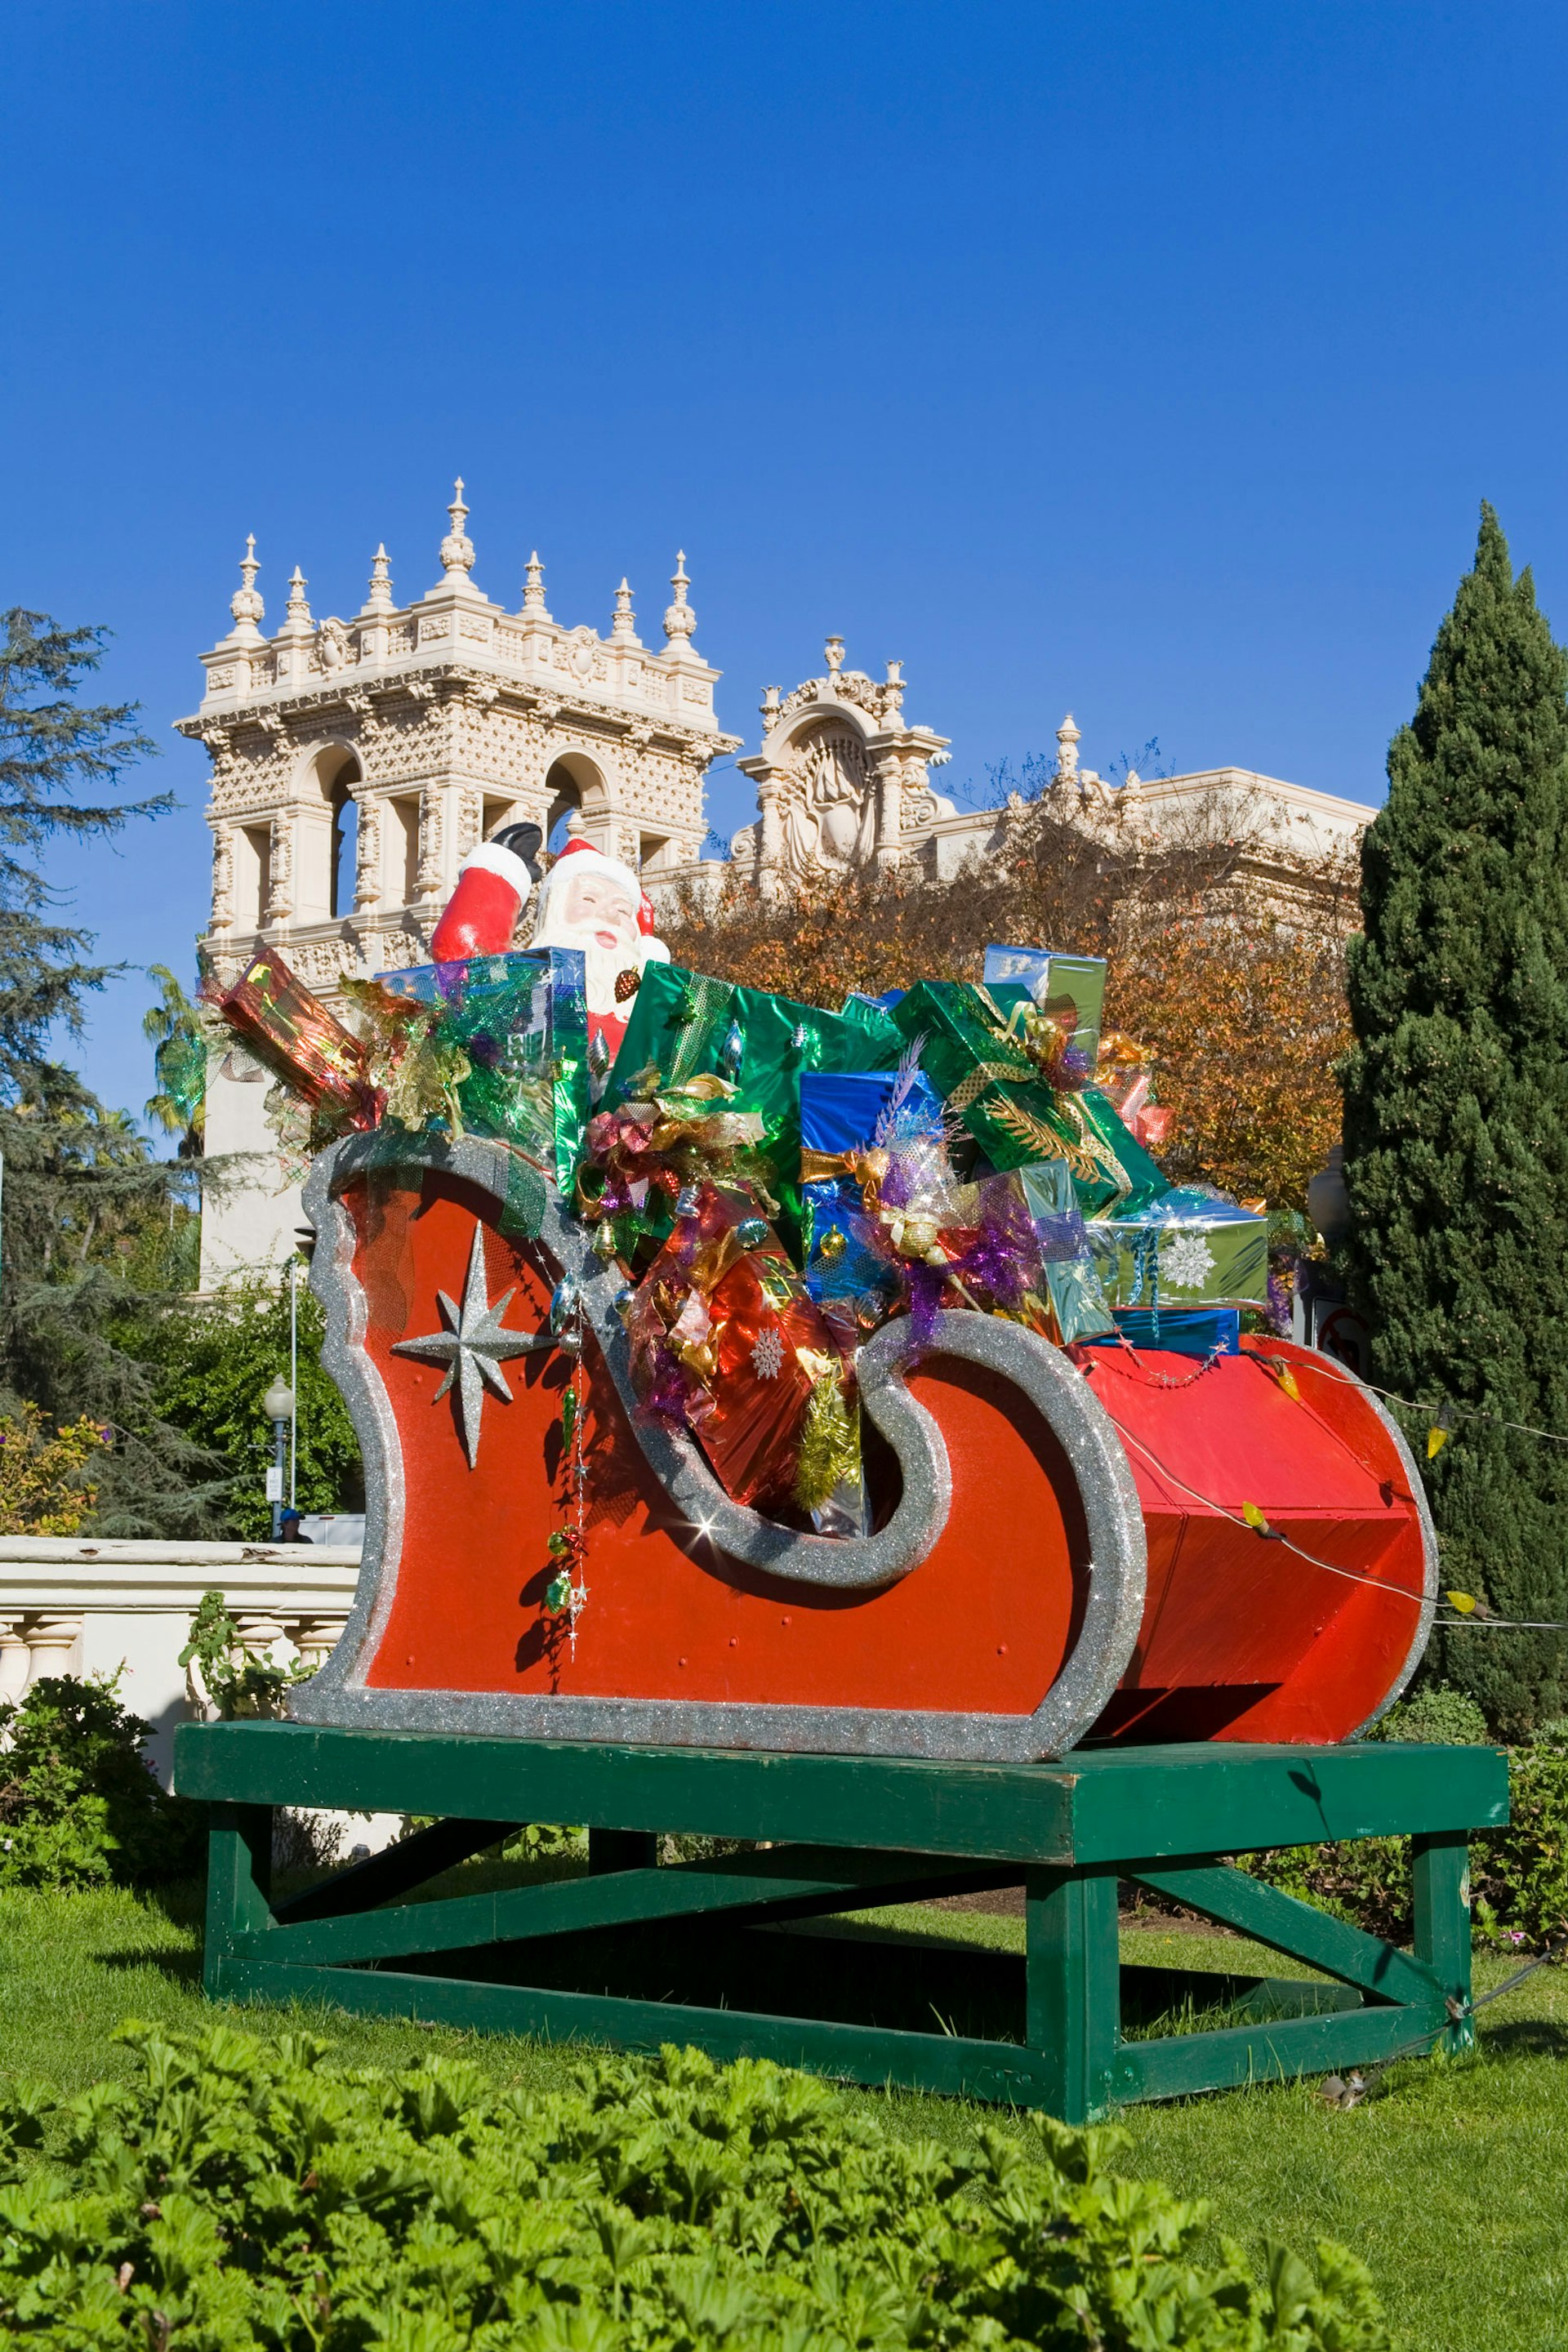 a decorative red sleigh filled with presents and Santa Clause in front of the Museum of Man in Balboa Park San Diego